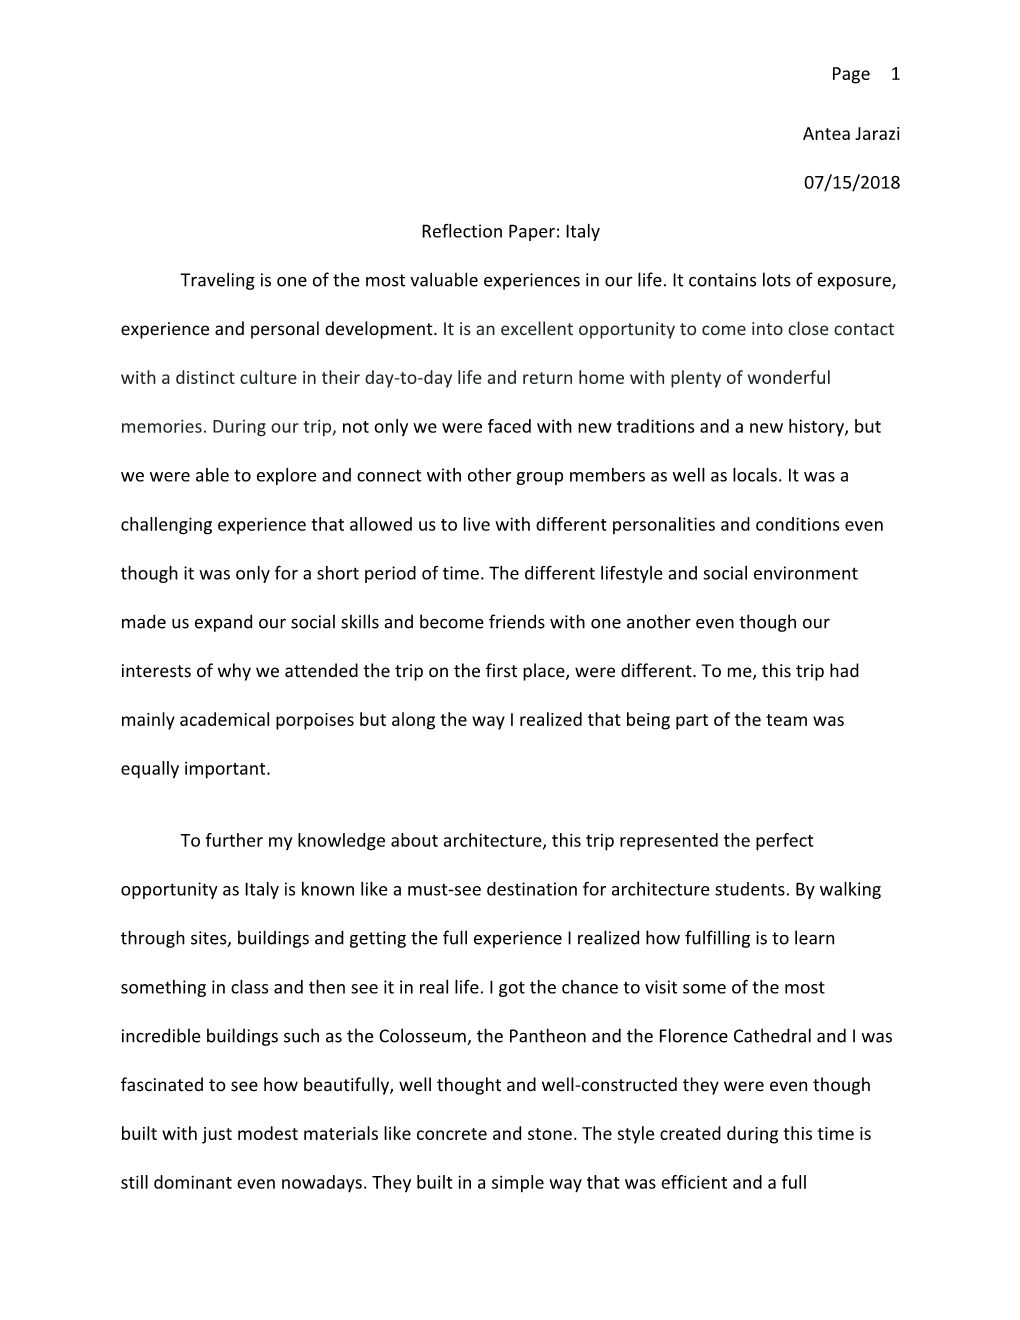 Page 1 Antea Jarazi 07/15/2018 Reflection Paper: Italy Traveling Is